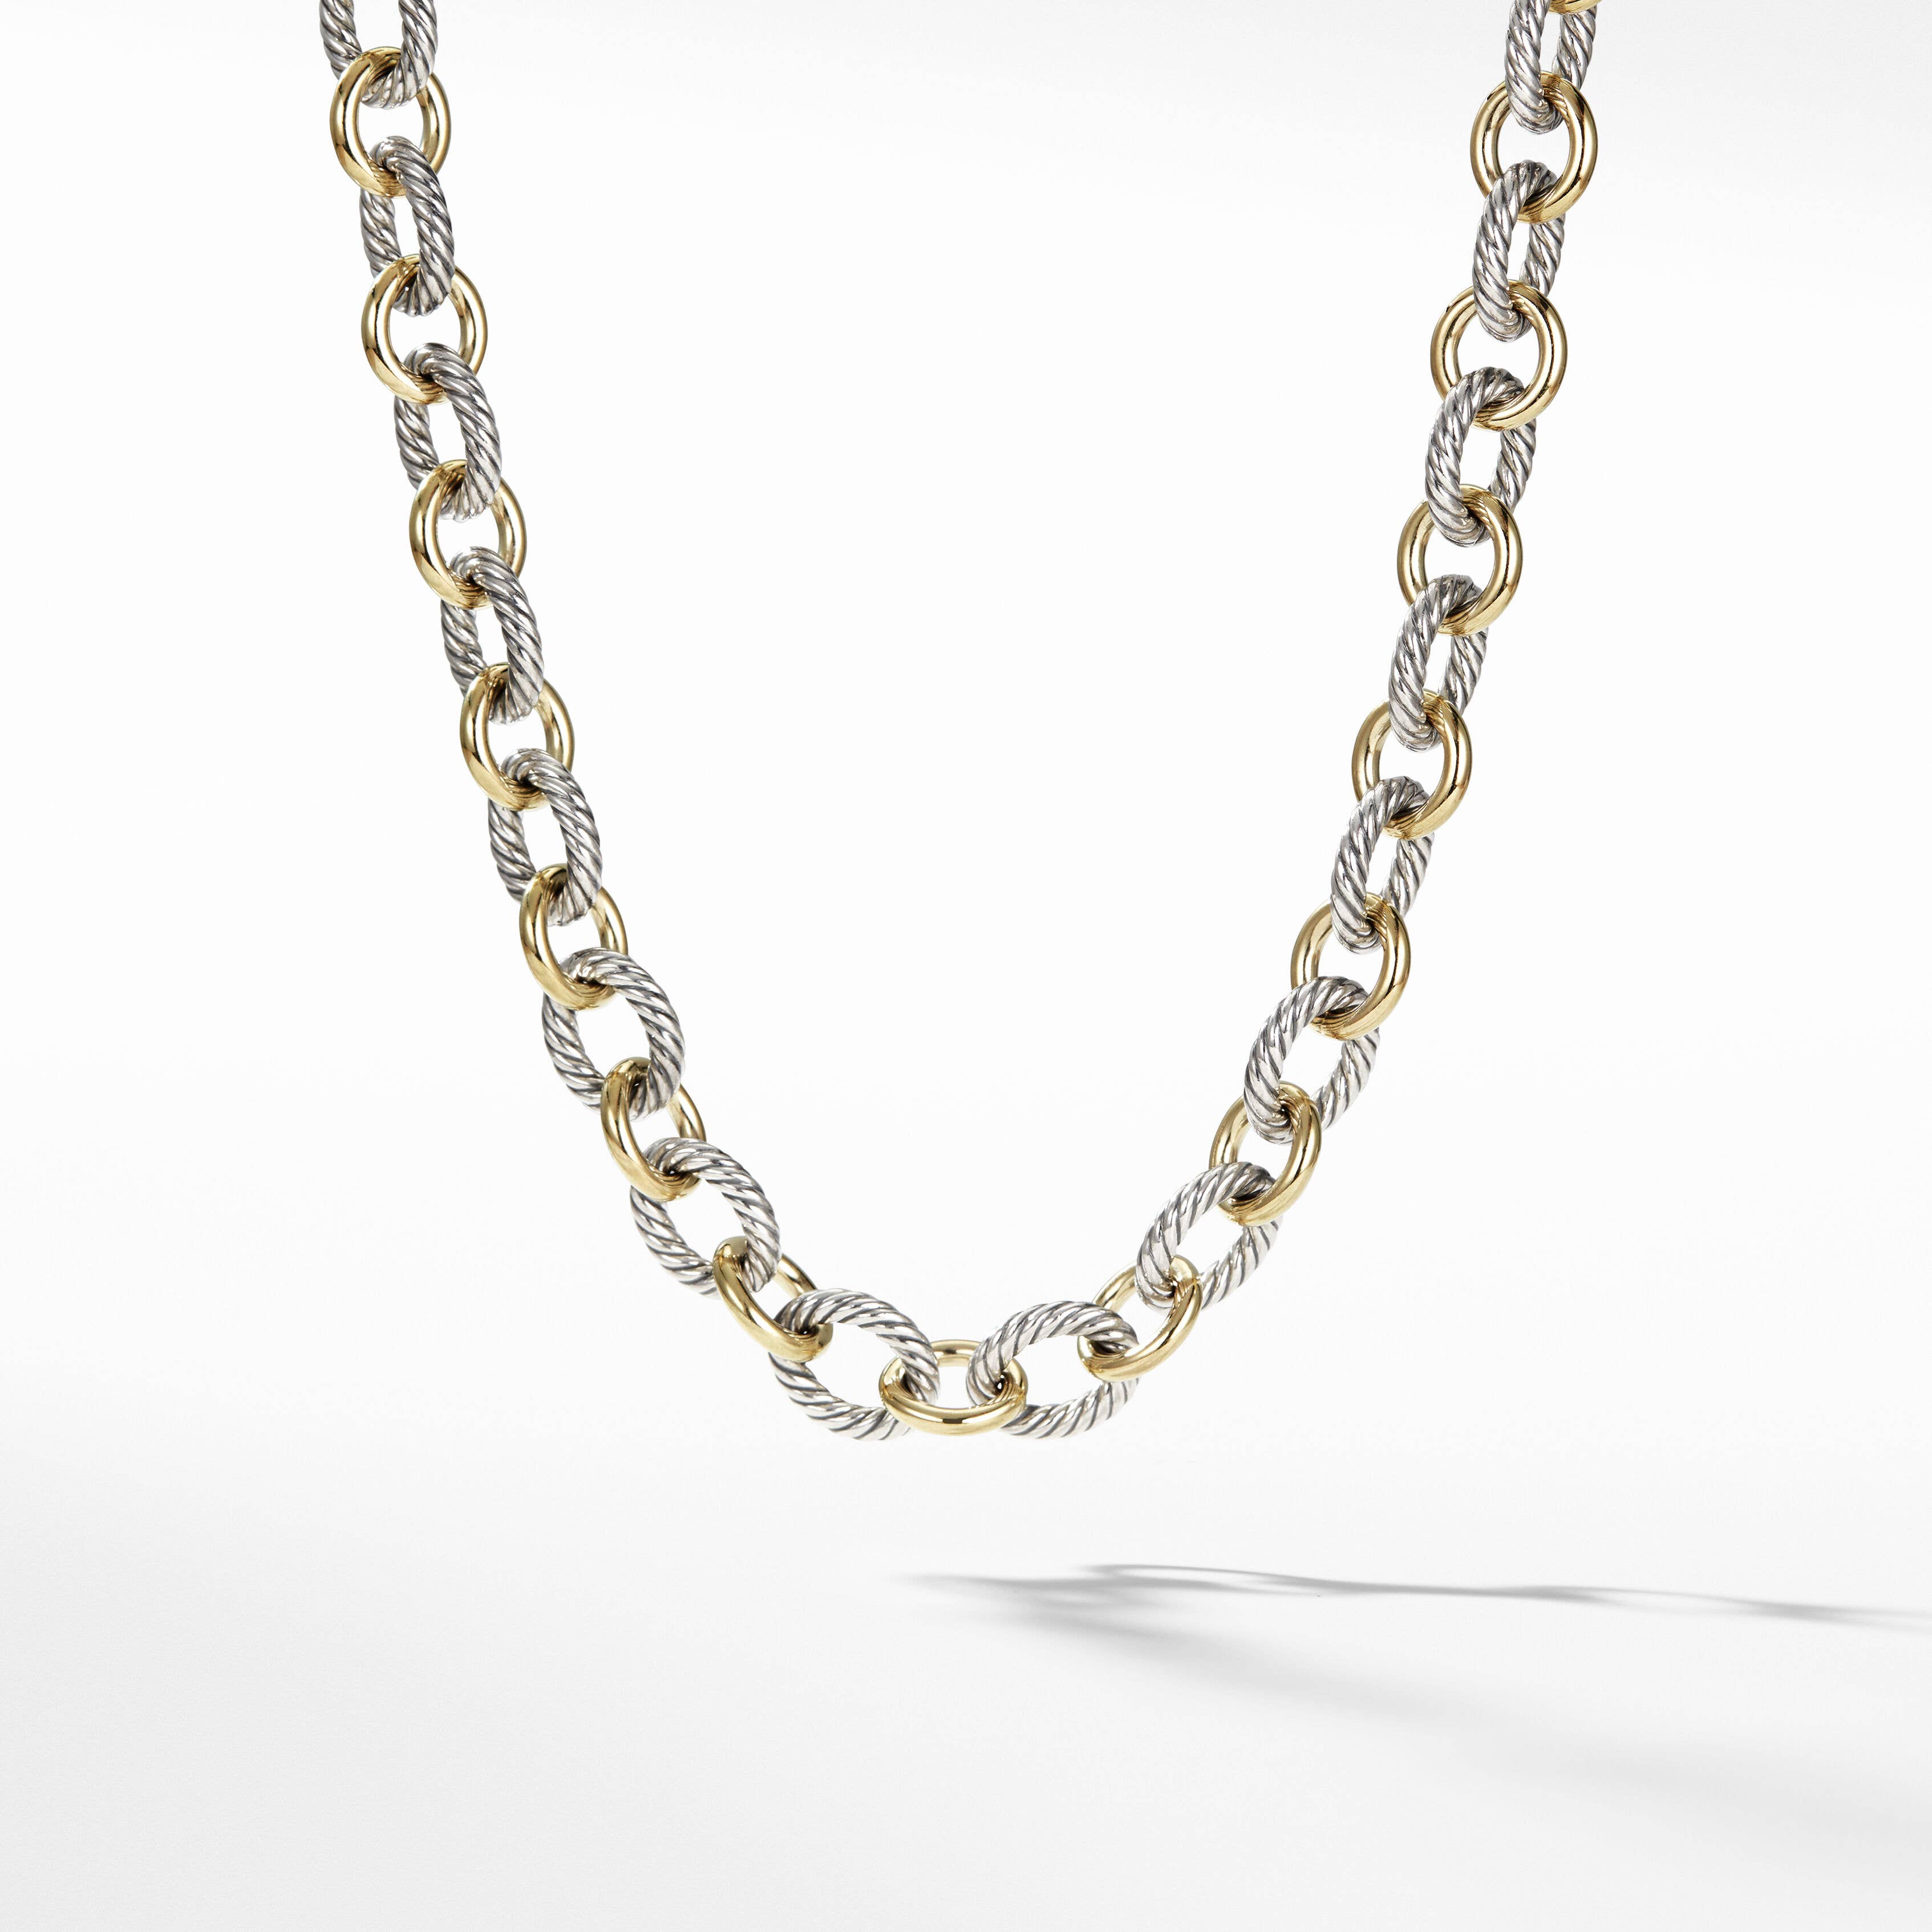 Oval Link Chain Necklace in Sterling Silver with 18K Yellow Gold